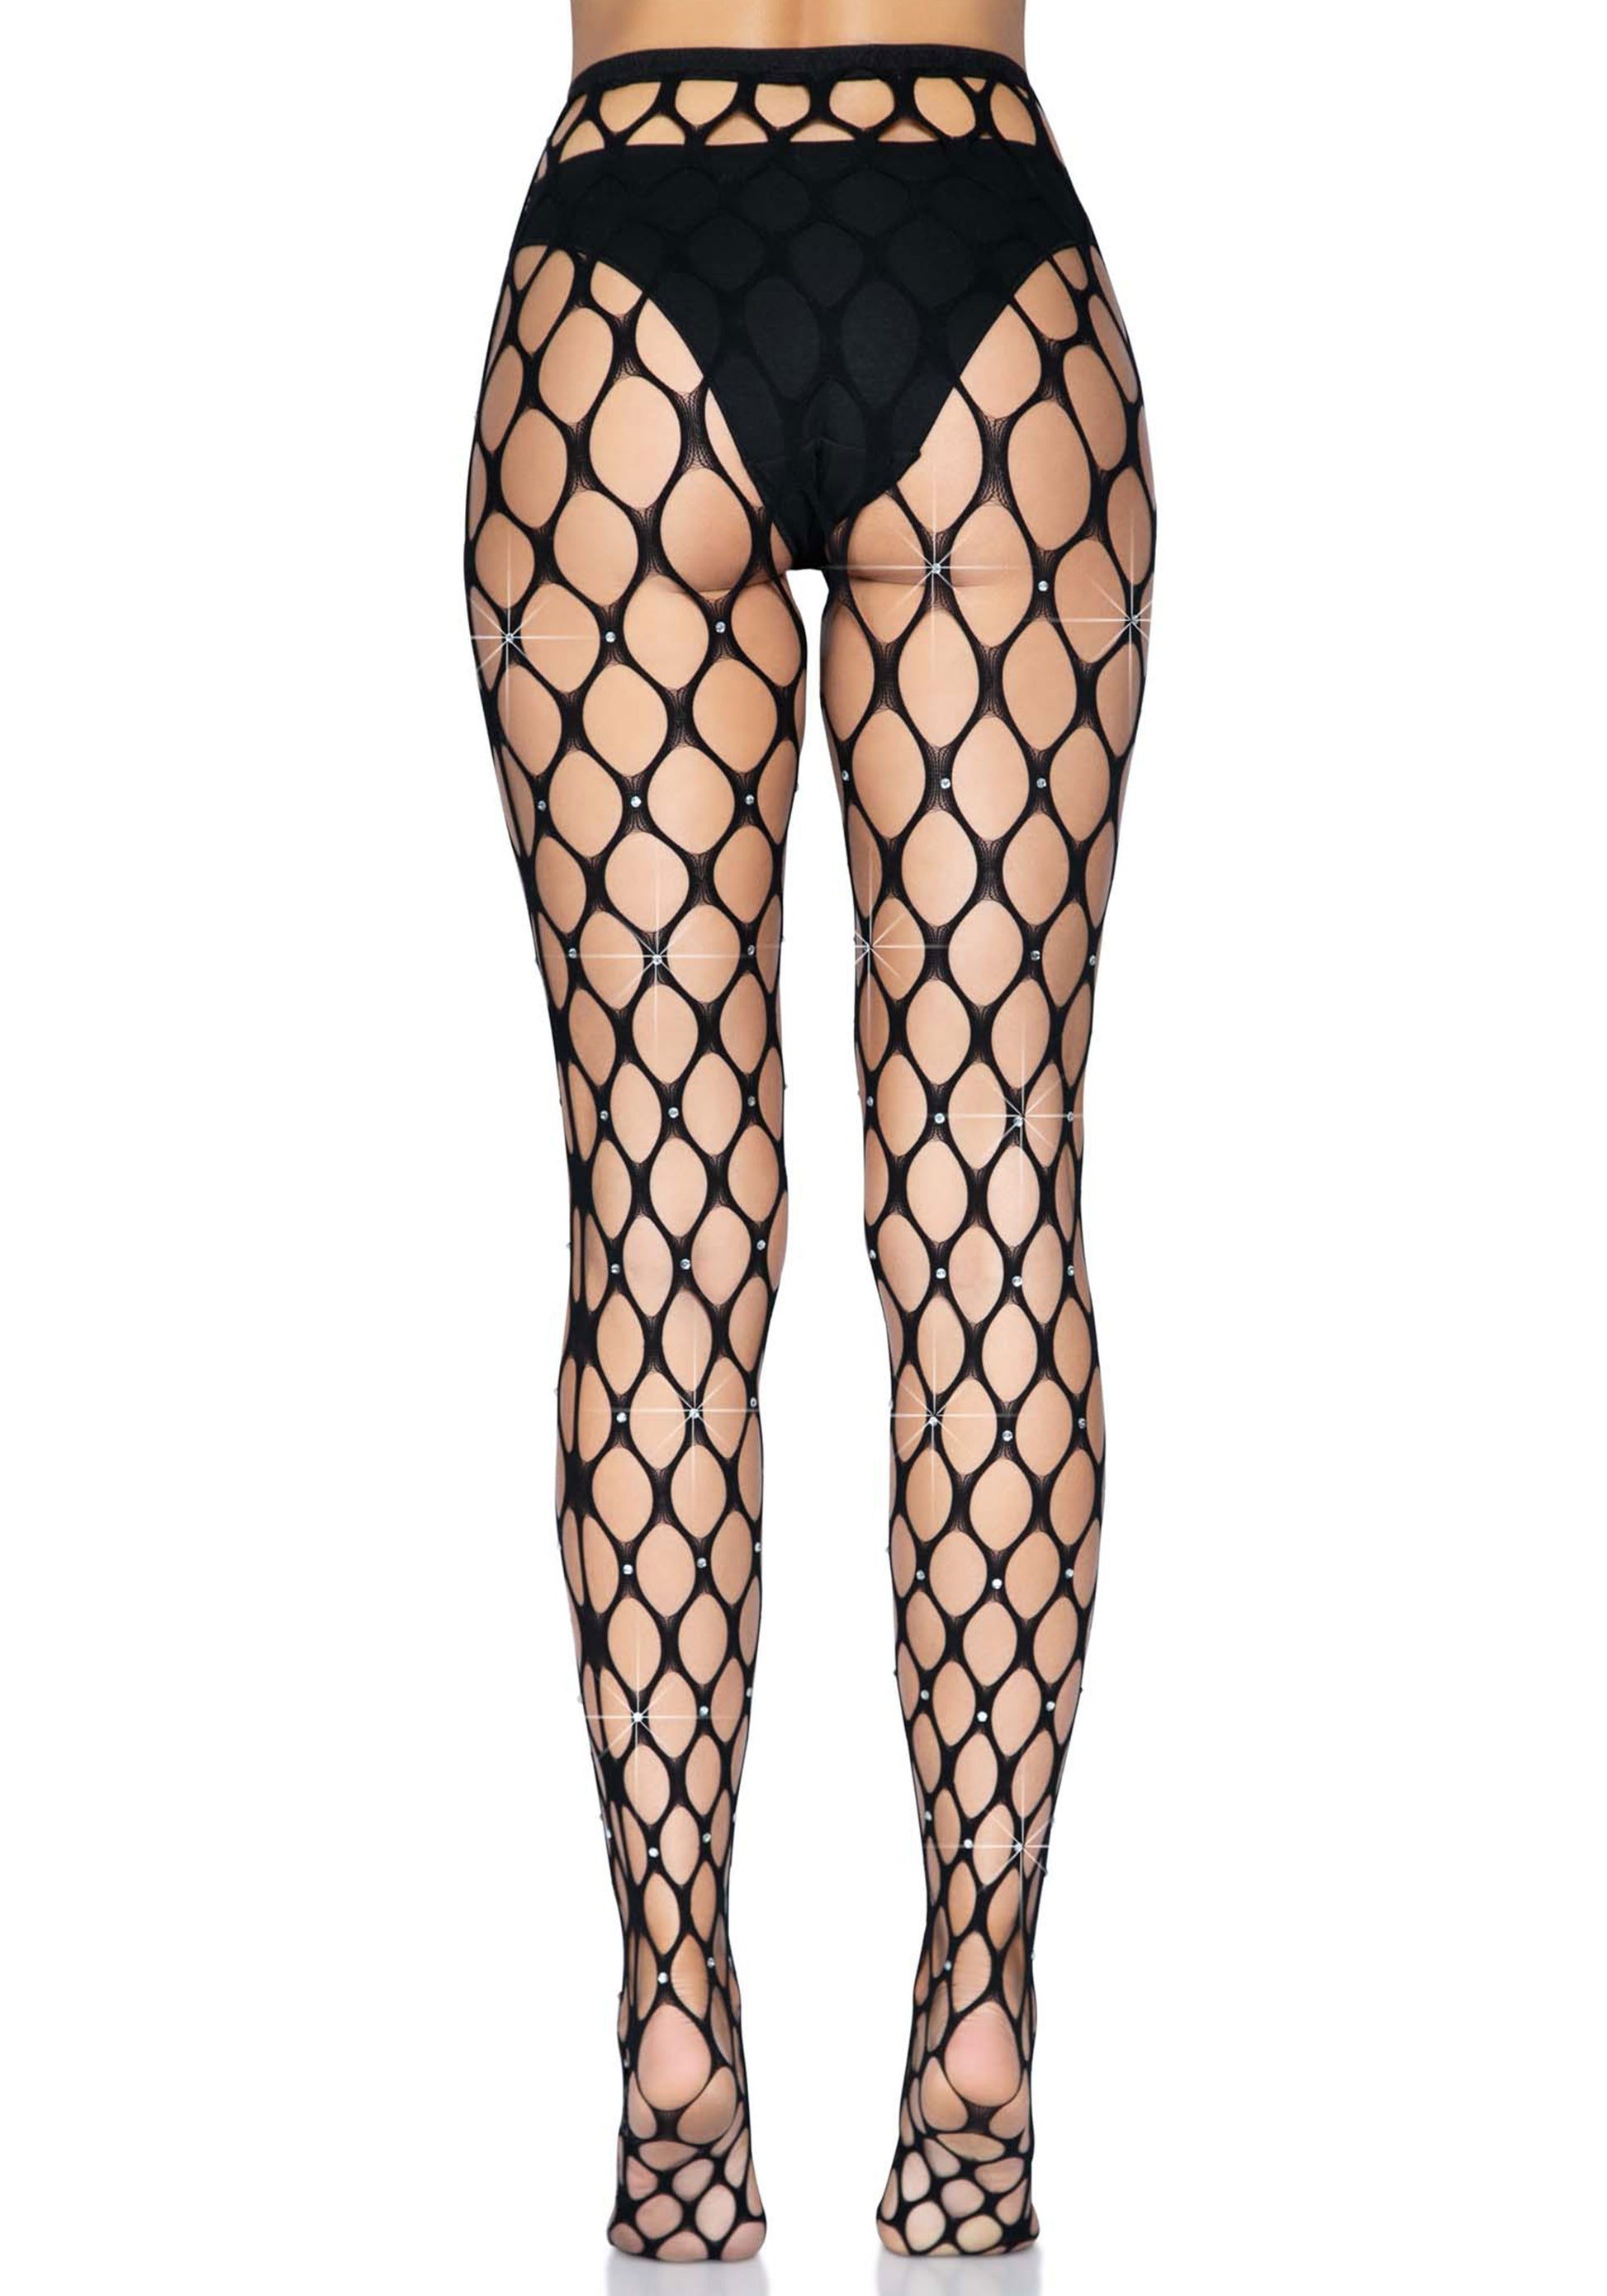 Leg Avenue 9713 Rhinestone Net Tights - Black thick pothole fishnet tights with sparkly diamante' jewels dotted all over.